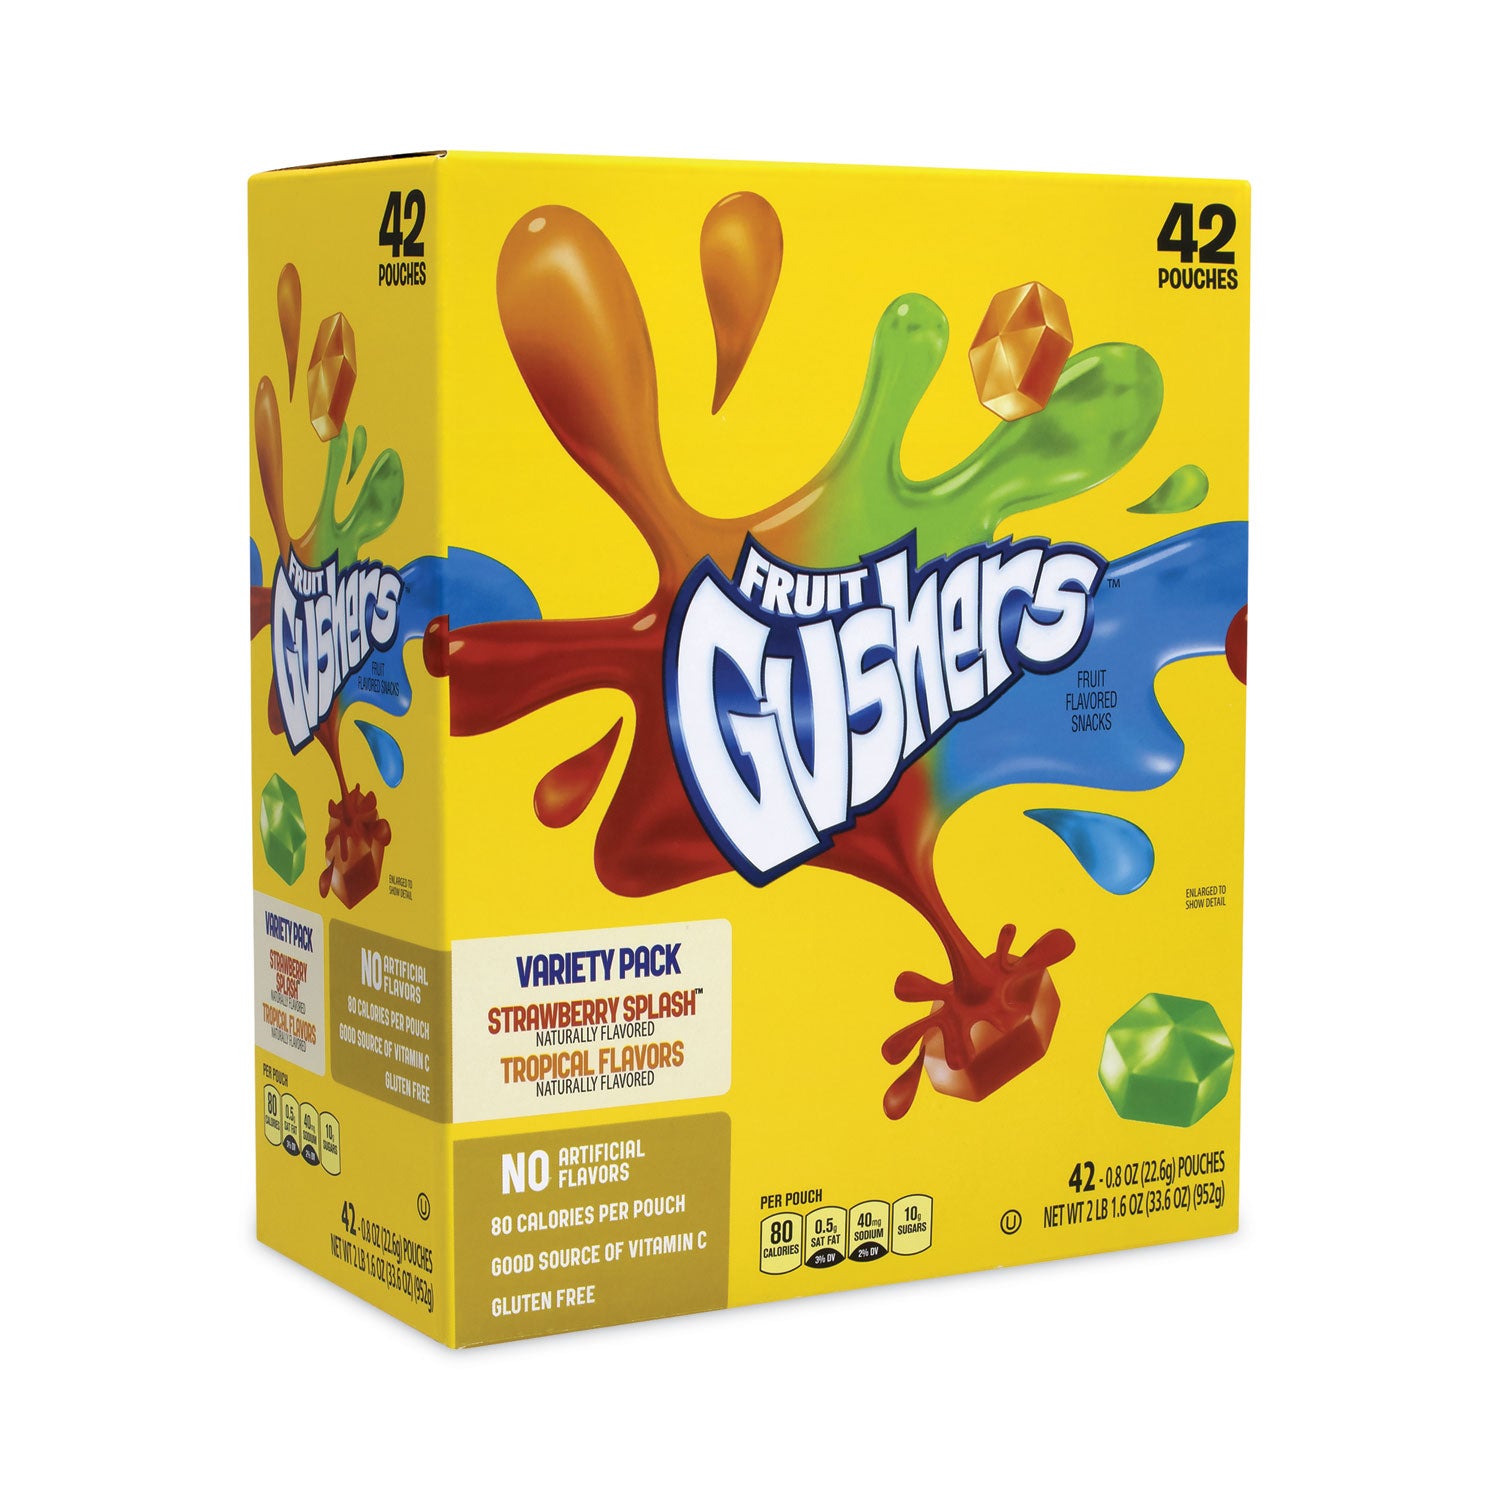 fruit-gushers-fruit-snacks-strawberry-and-tropical-fruit-flavors-08-oz-42-pouches-carton-ships-in-1-3-business-days_grr22001036 - 1